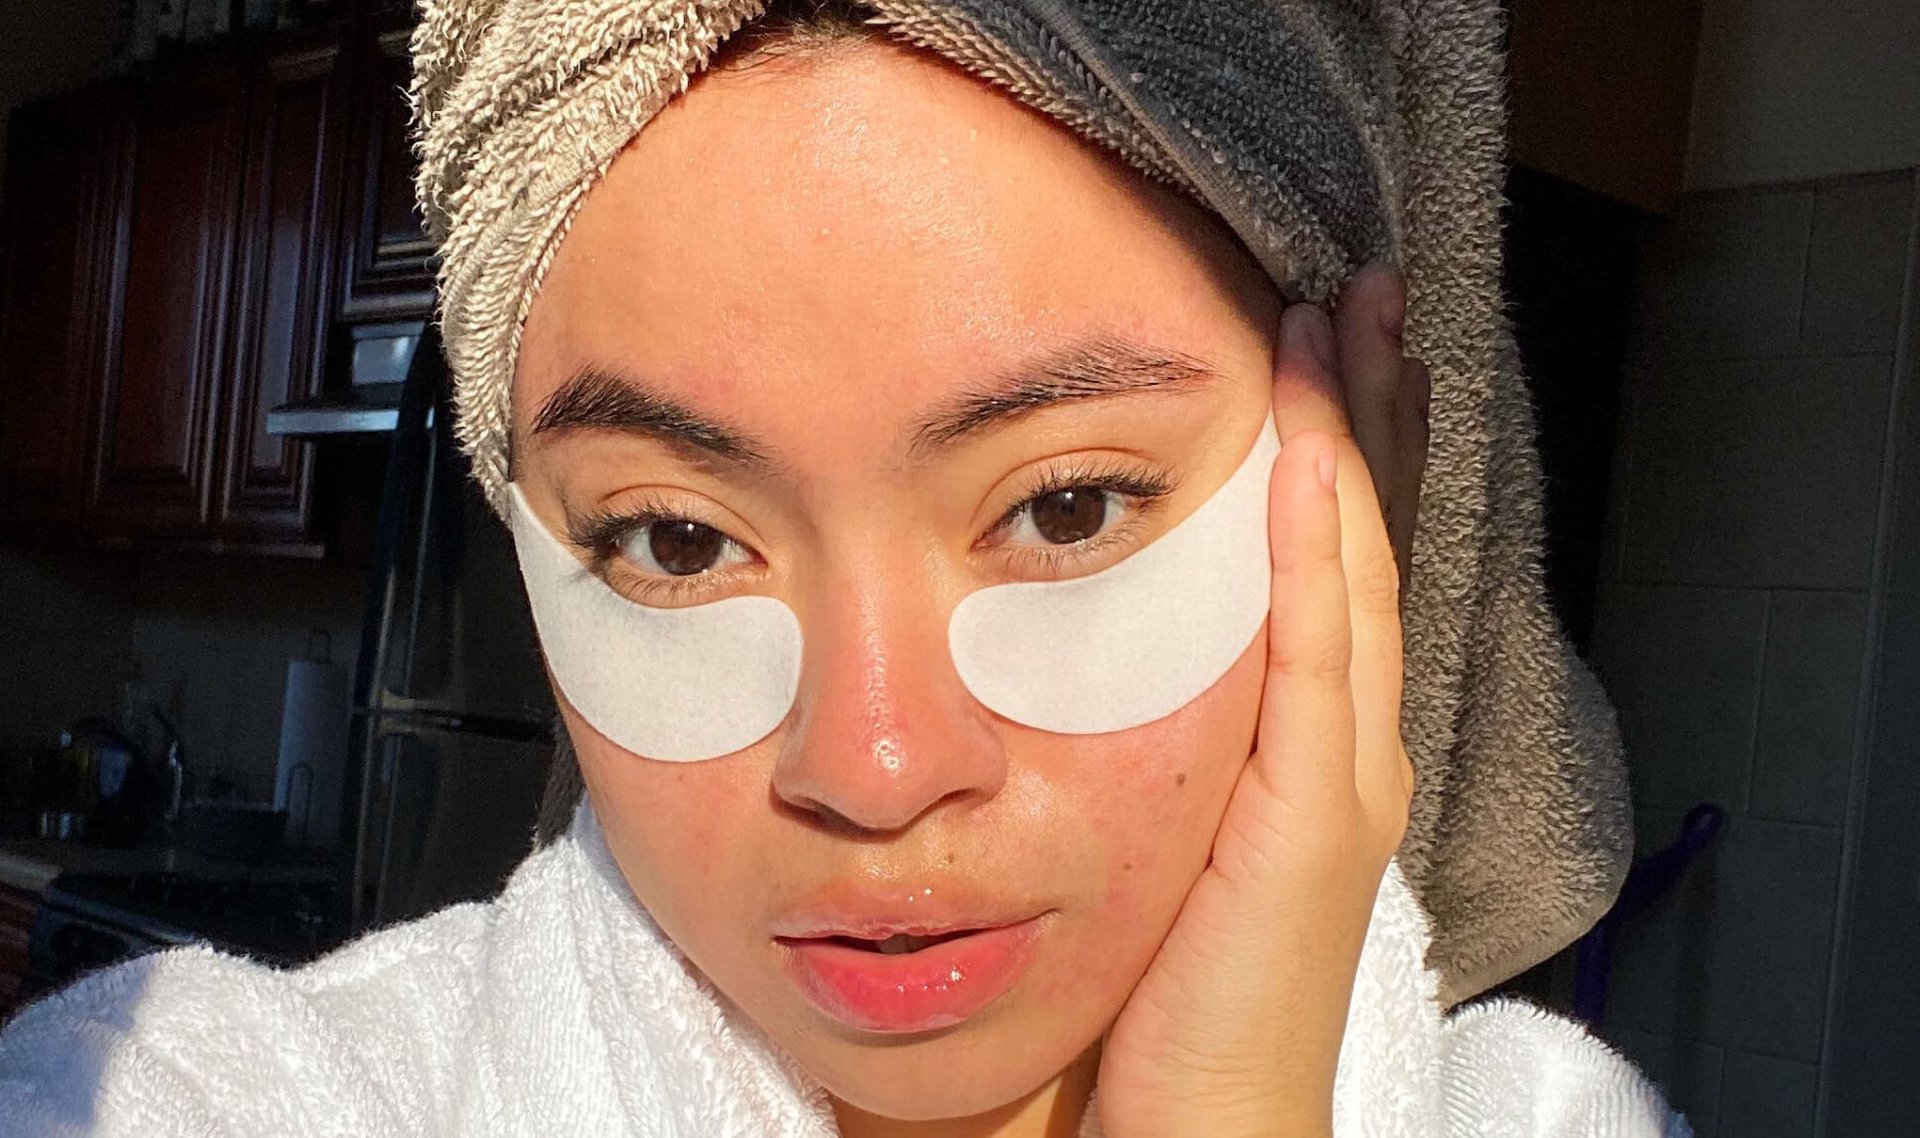 Skincare.com Editors Share 7 Self-Care Tips That Help Them Stay Zen